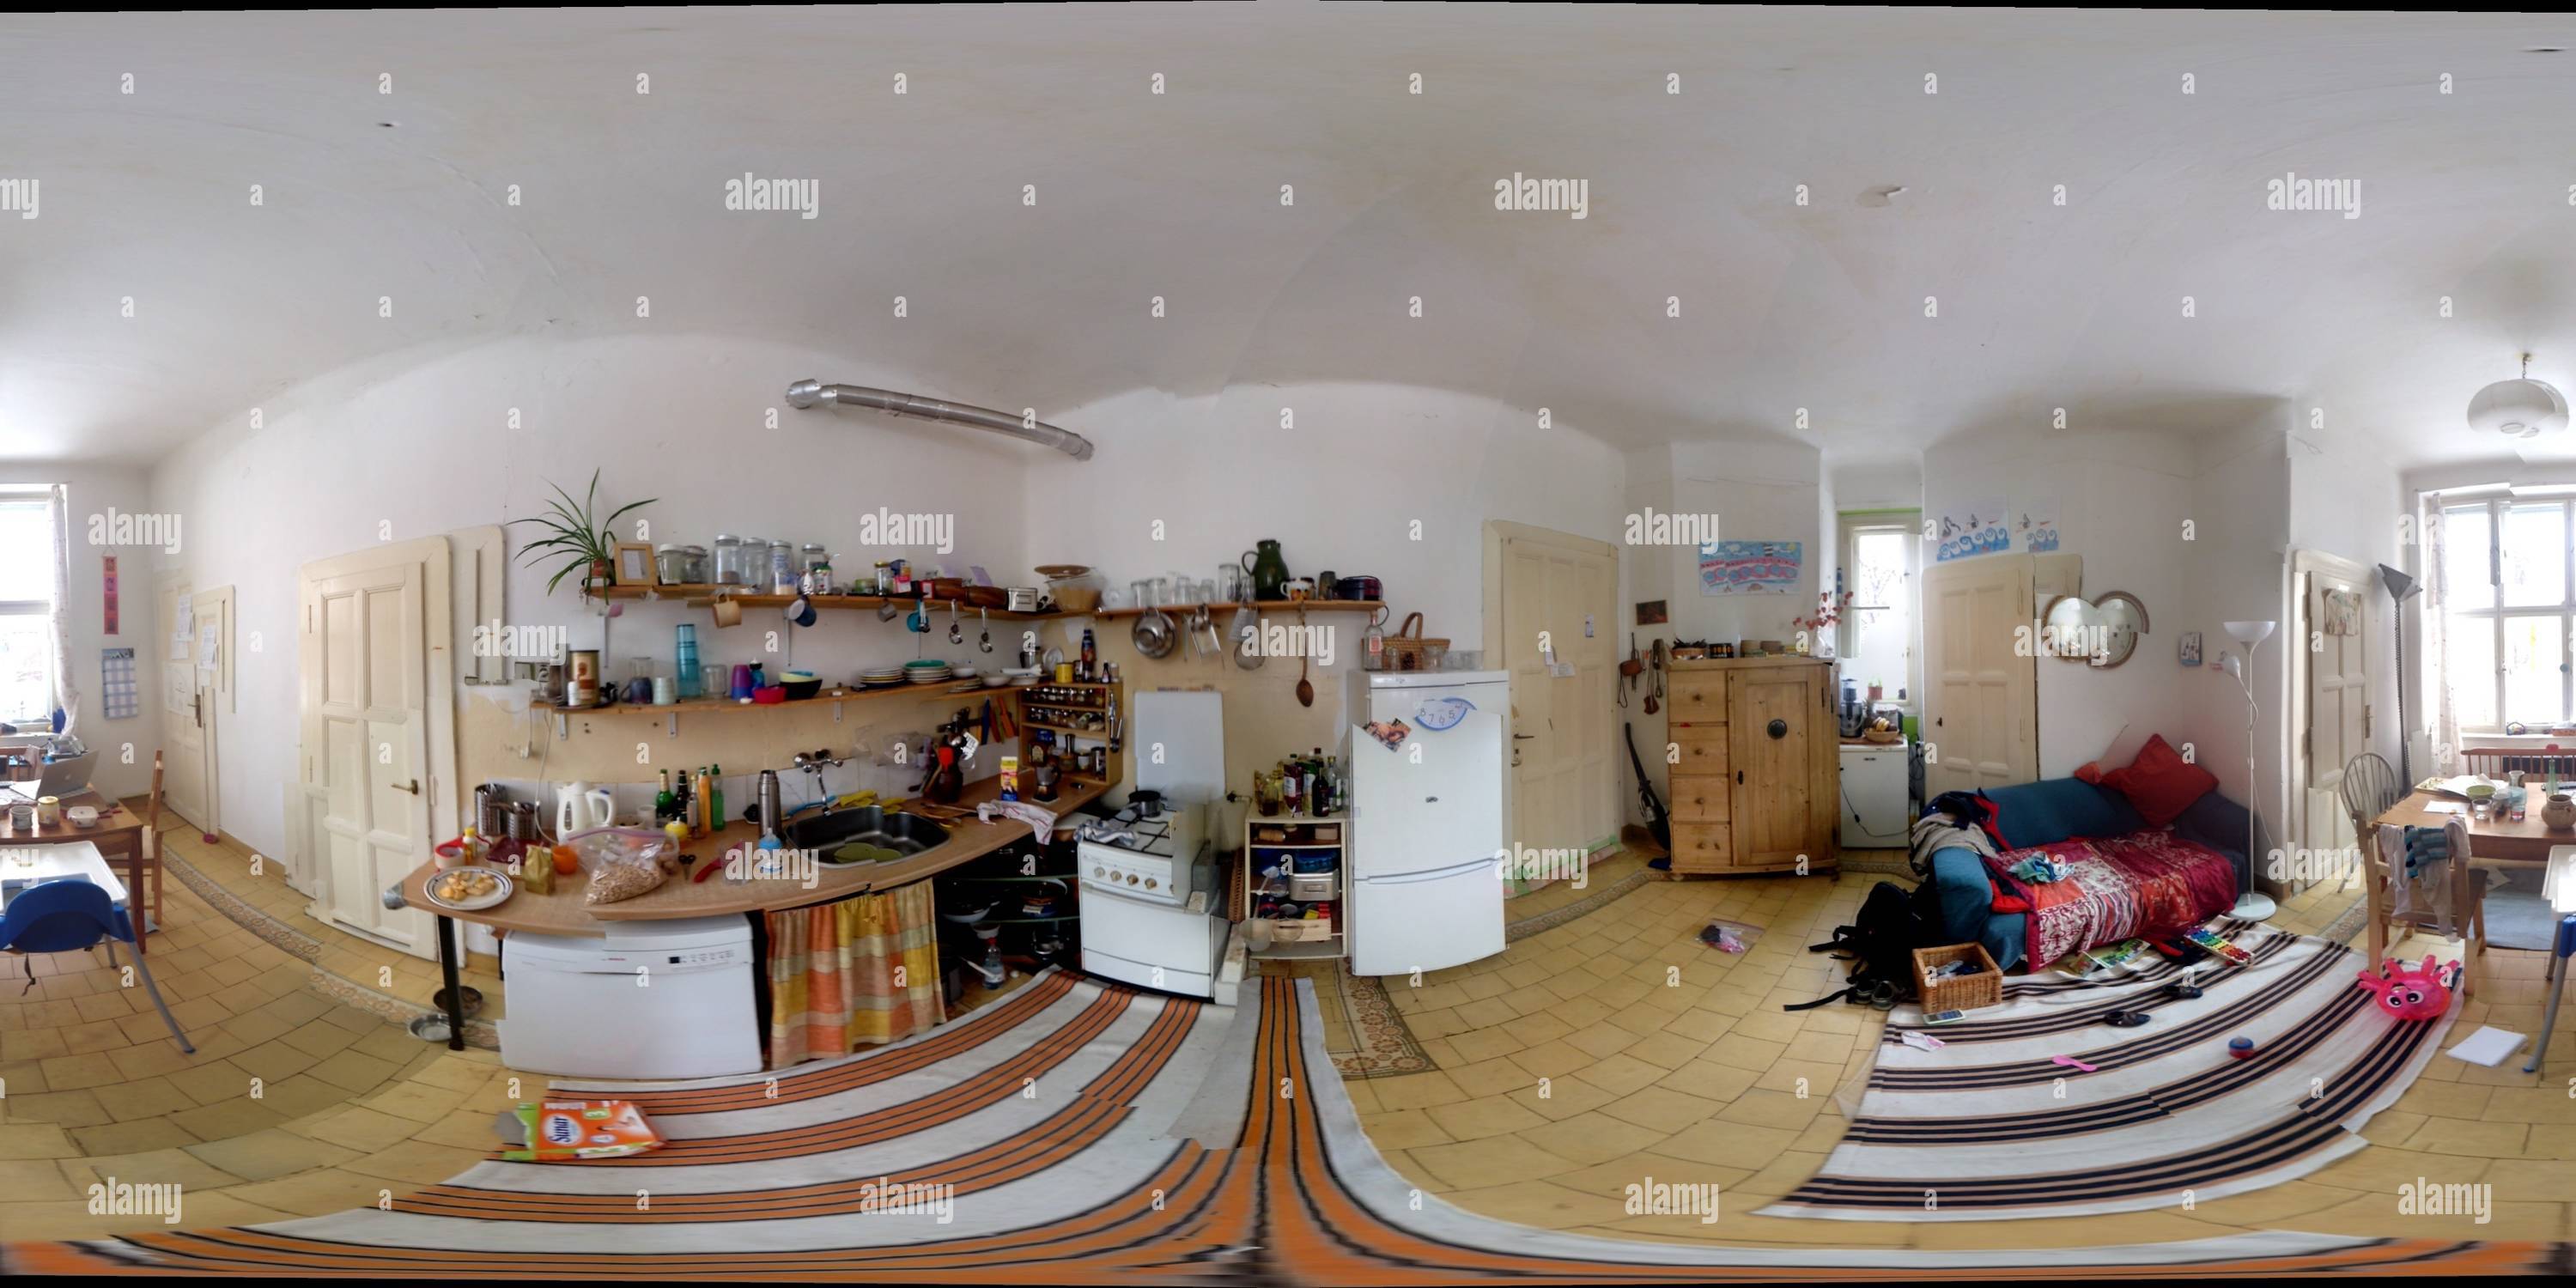 360 degree panoramic view of Photosynth kitchen test